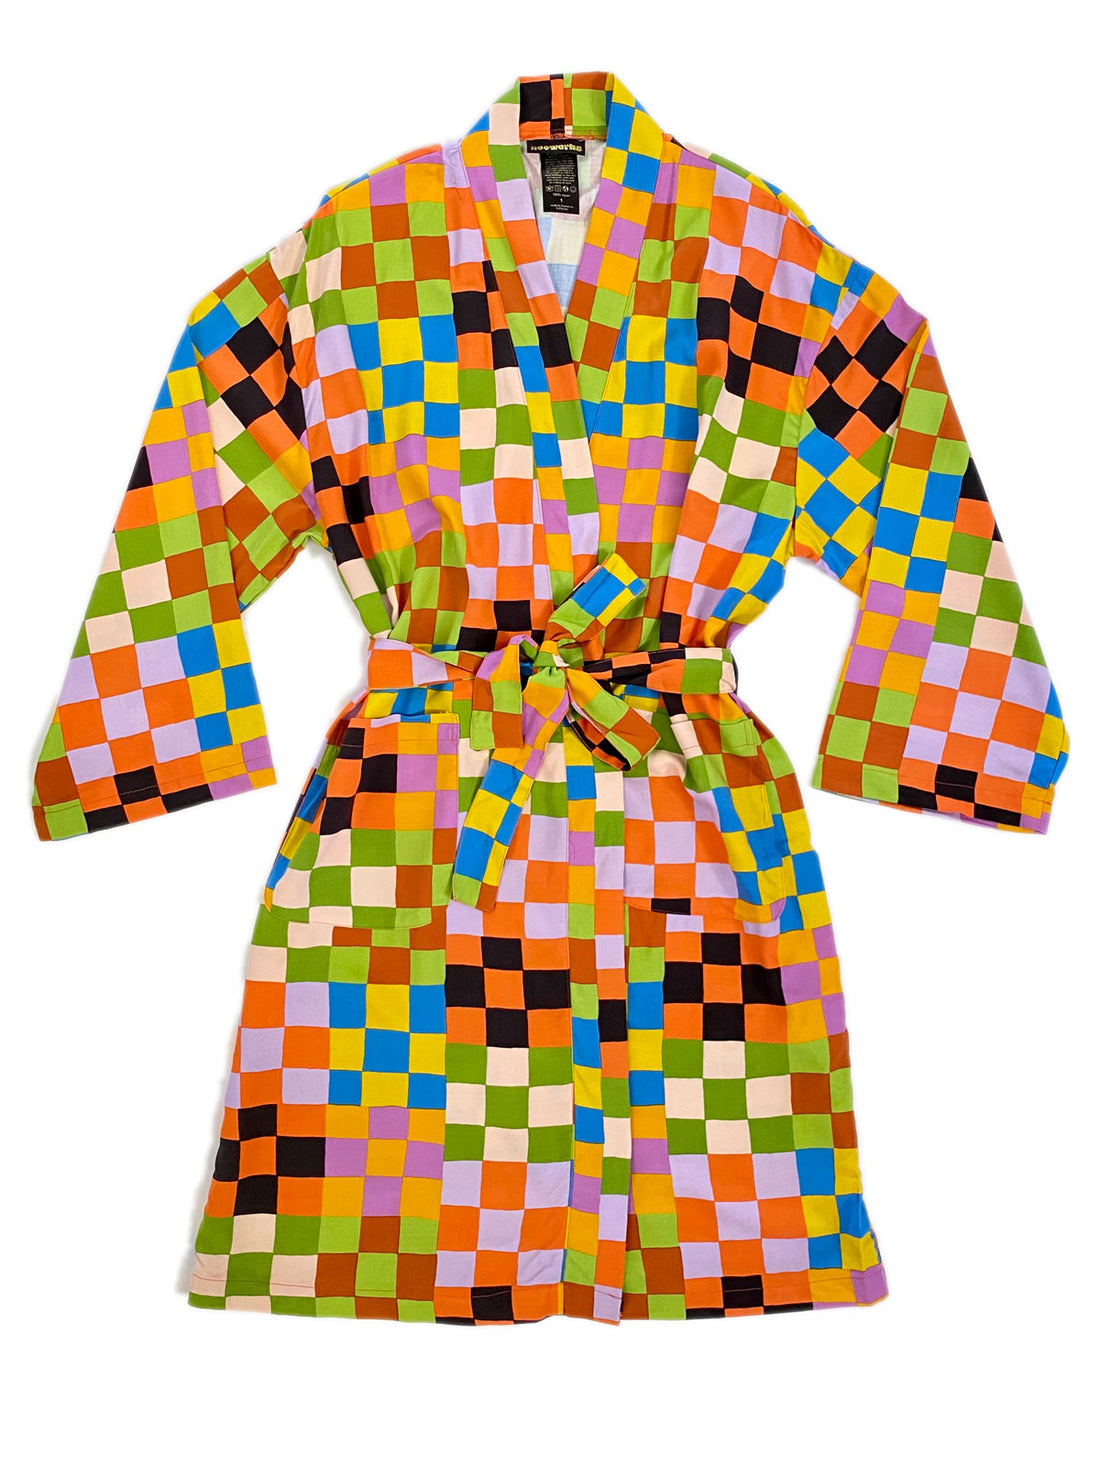 Carnival Robe *Limited Edition*